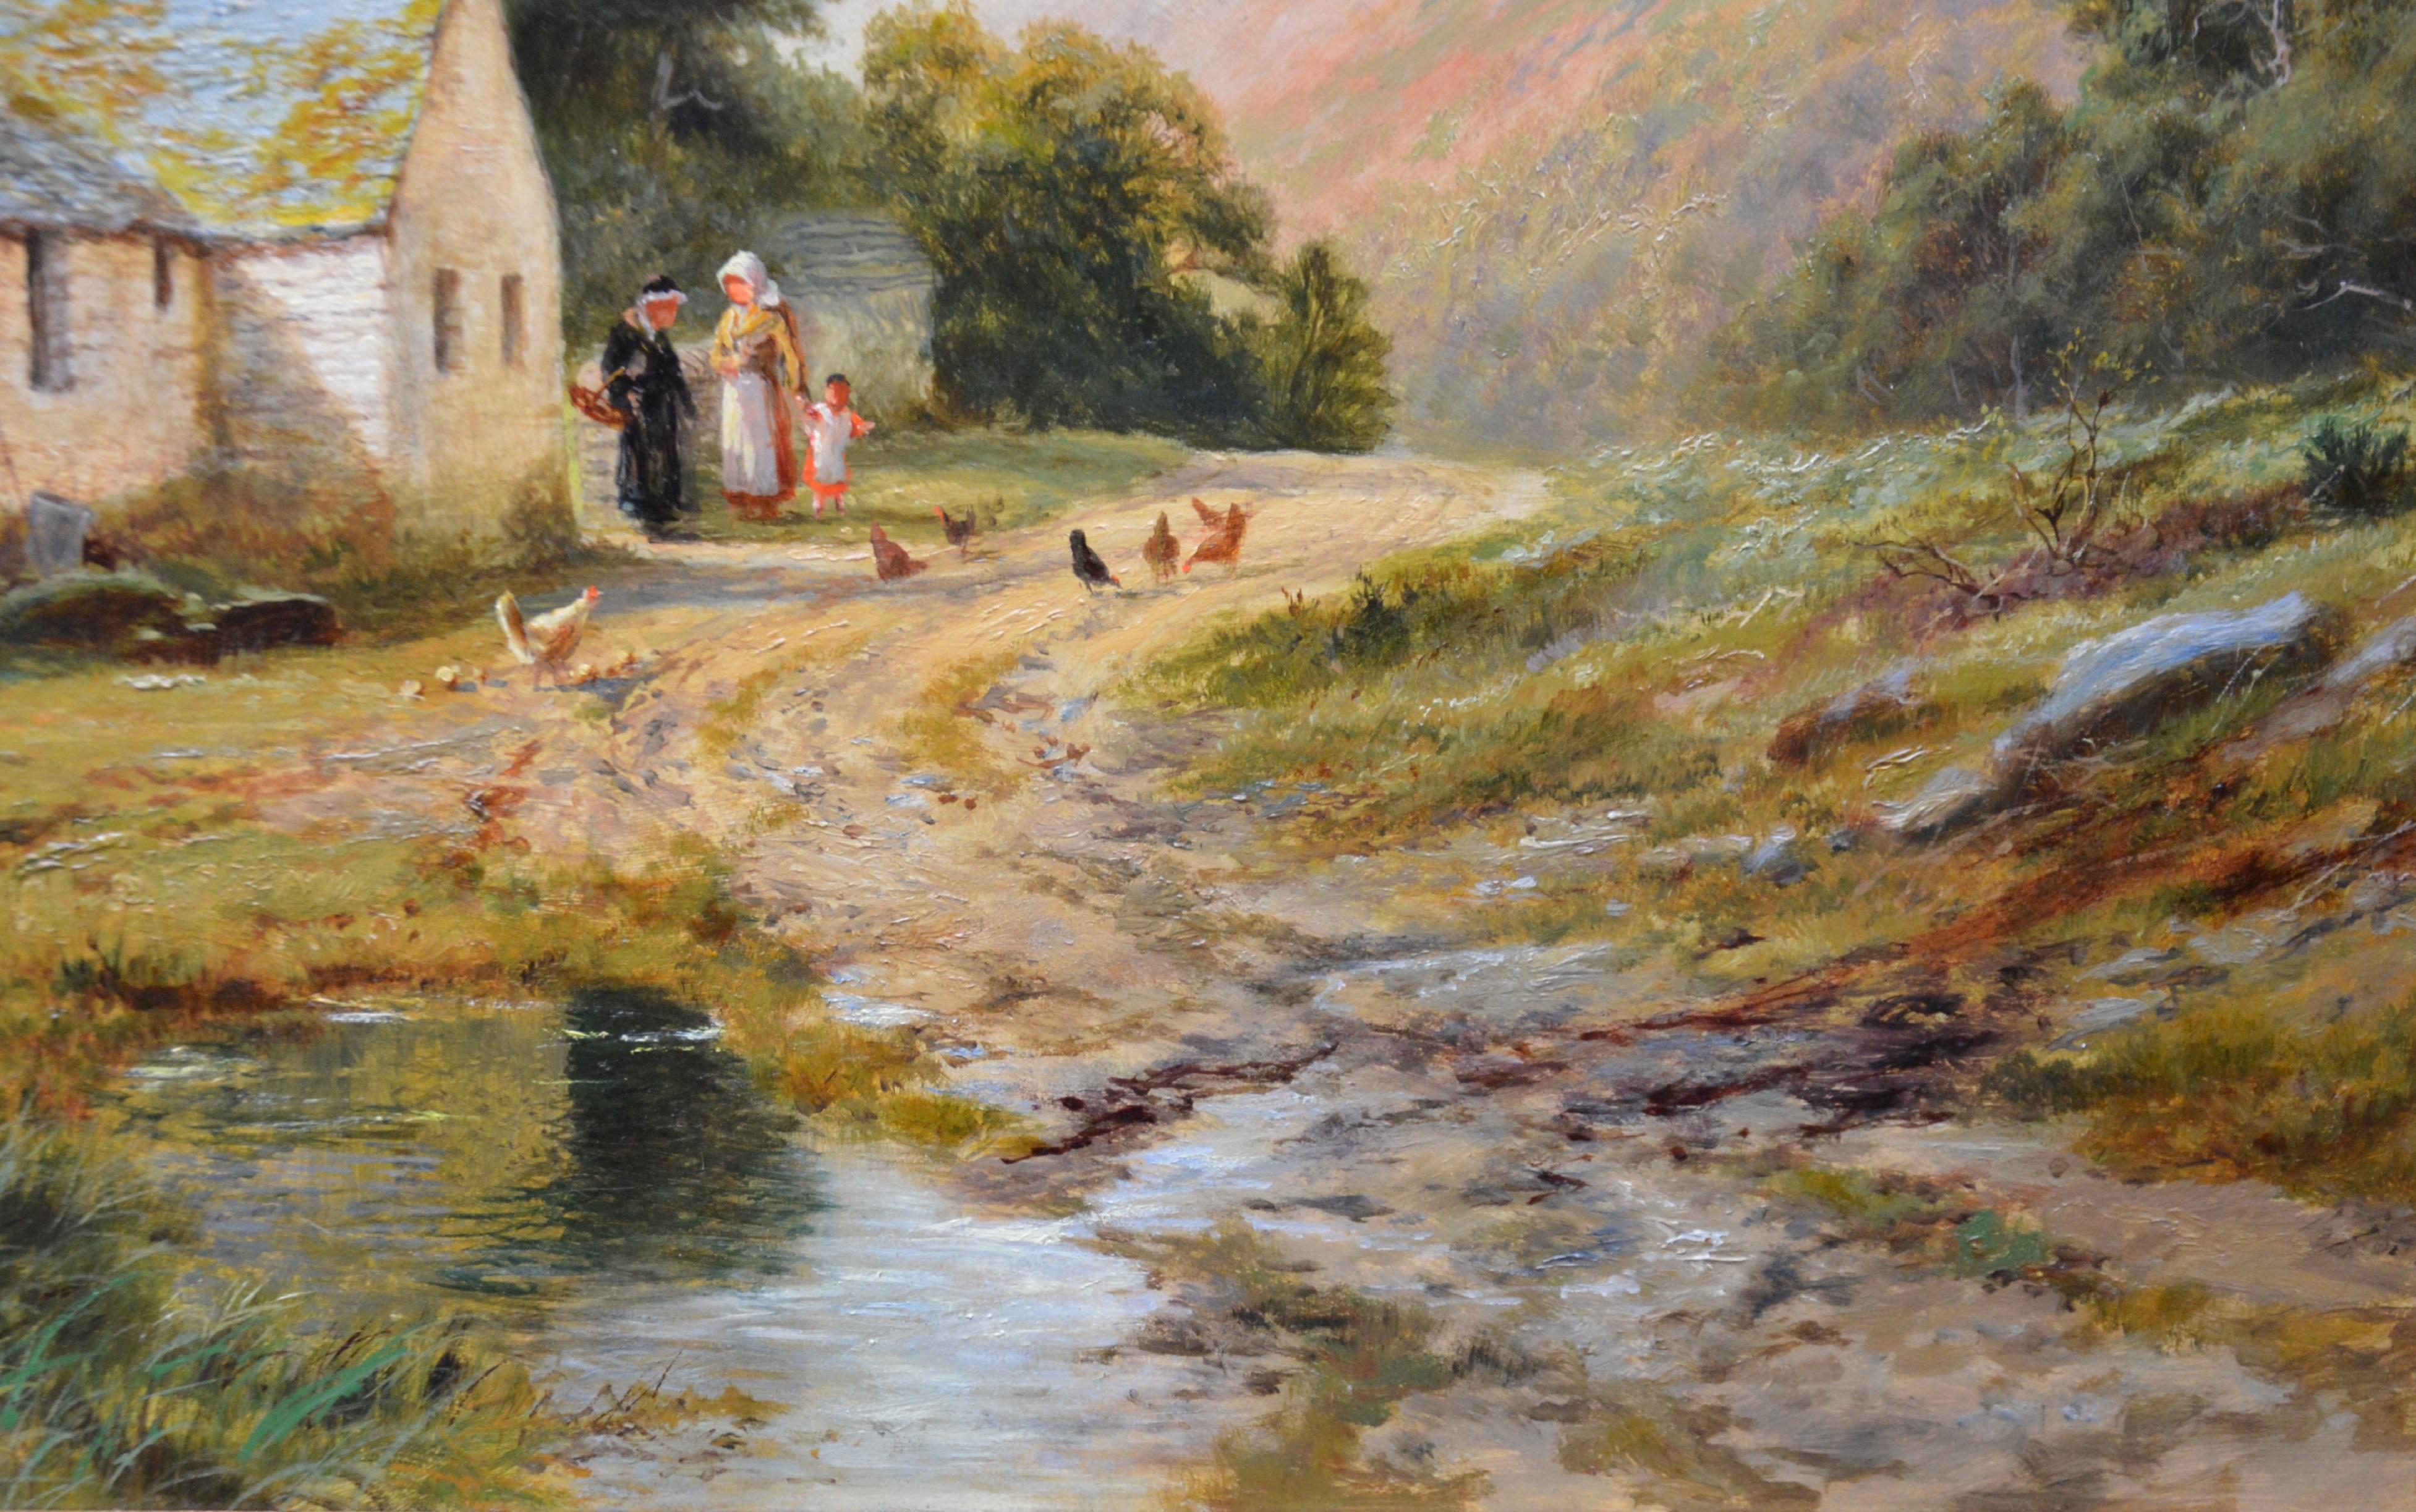 Lledr Valley - 19th Century Summer Landscape Oil Painting of Snowdonia Wales 4